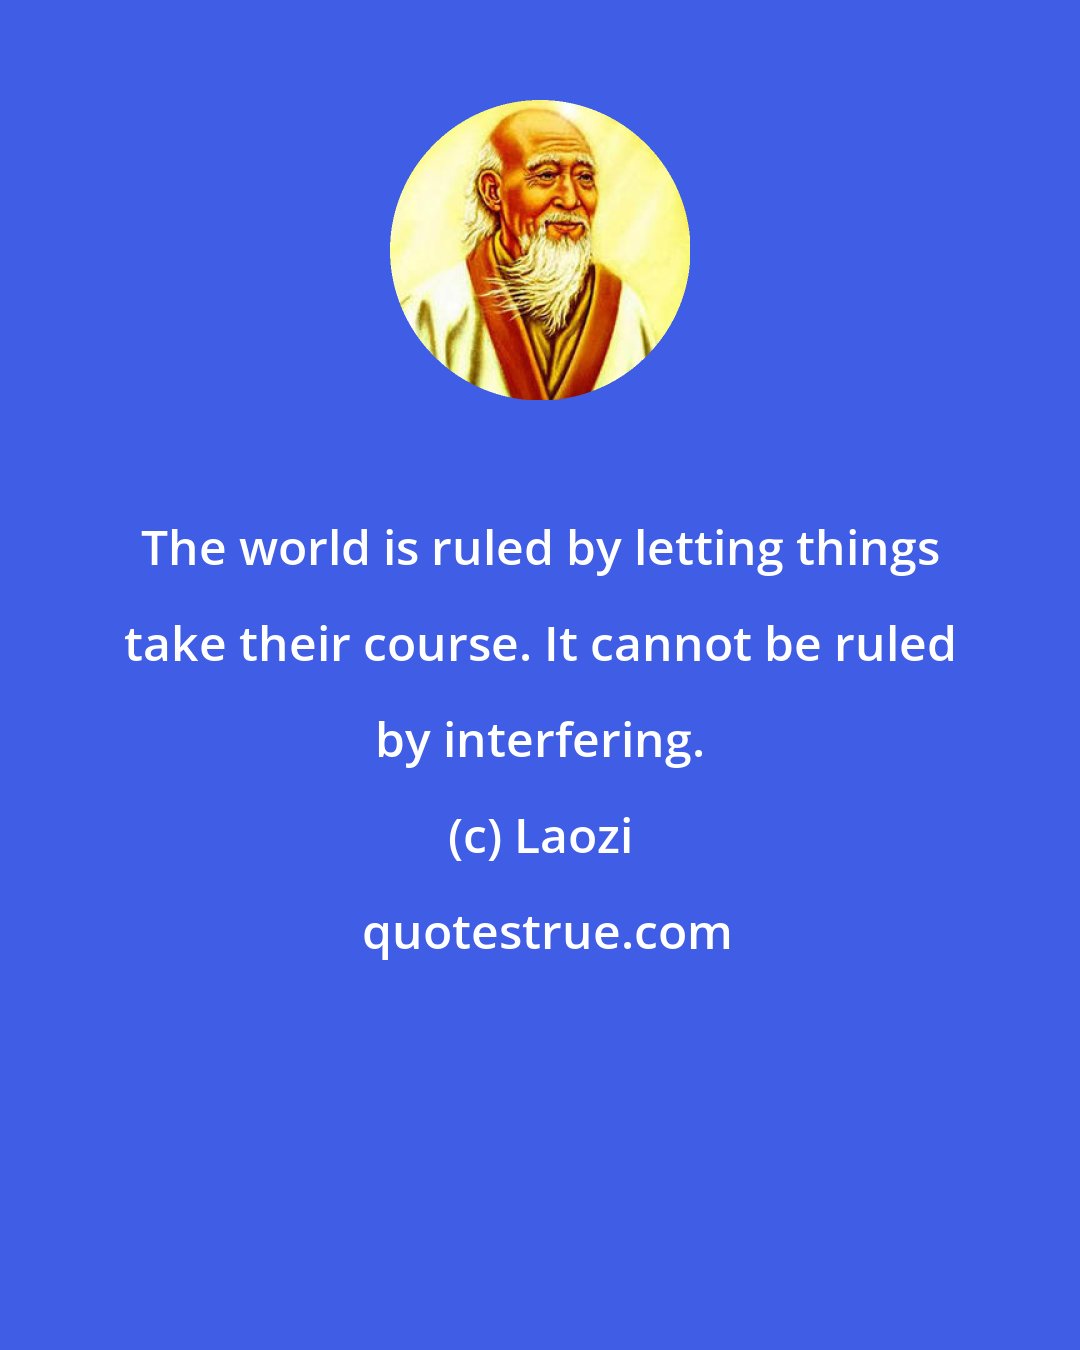 Laozi: The world is ruled by letting things take their course. It cannot be ruled by interfering.